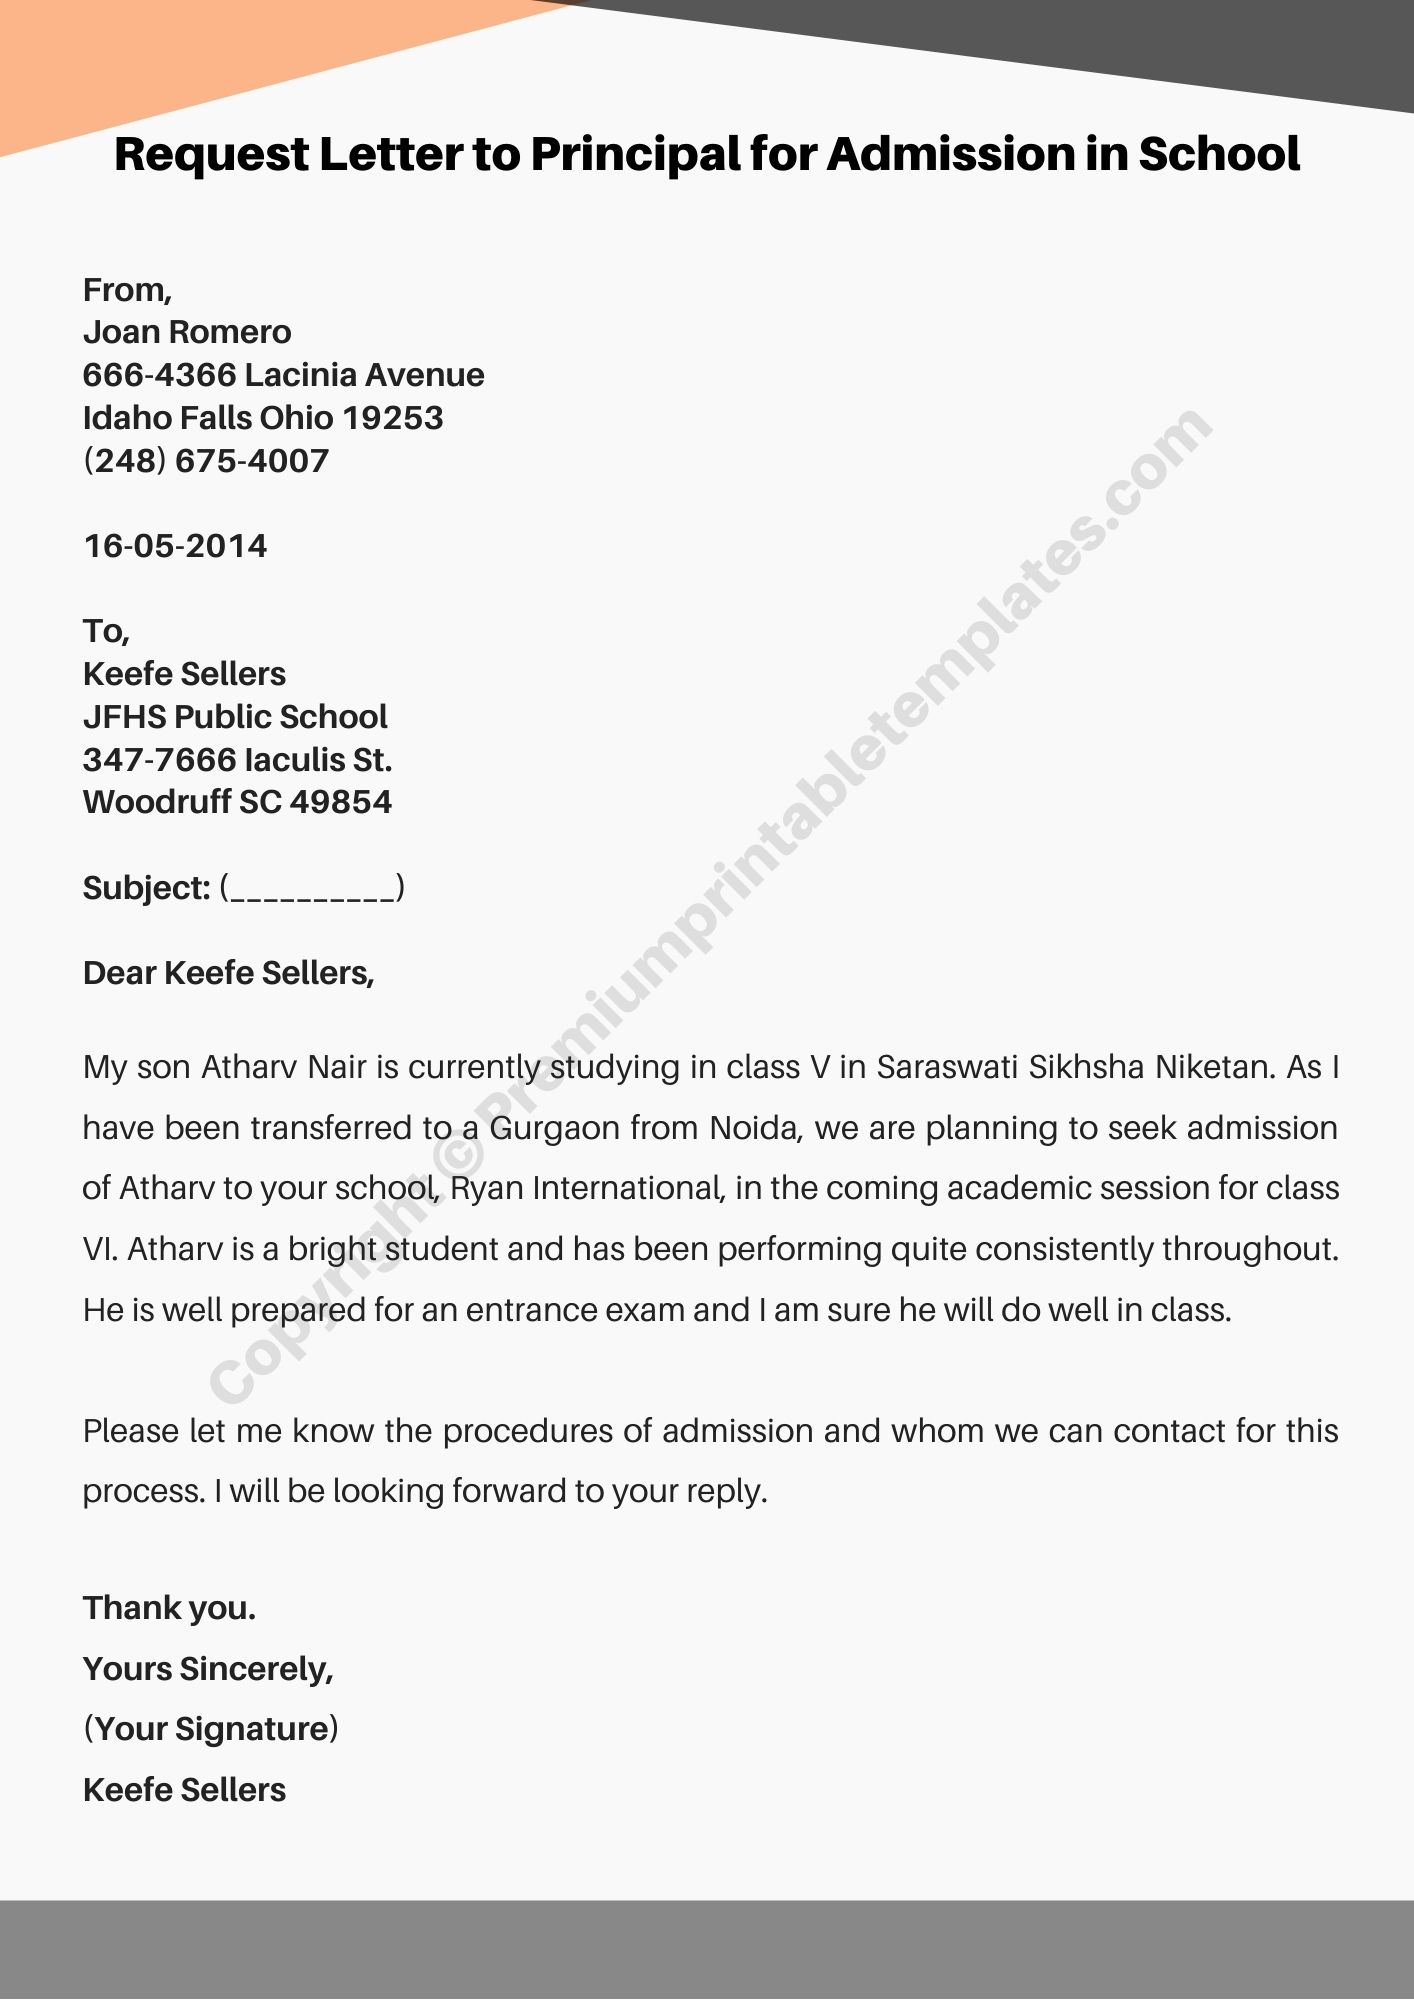 application letter to the principal for admission in school